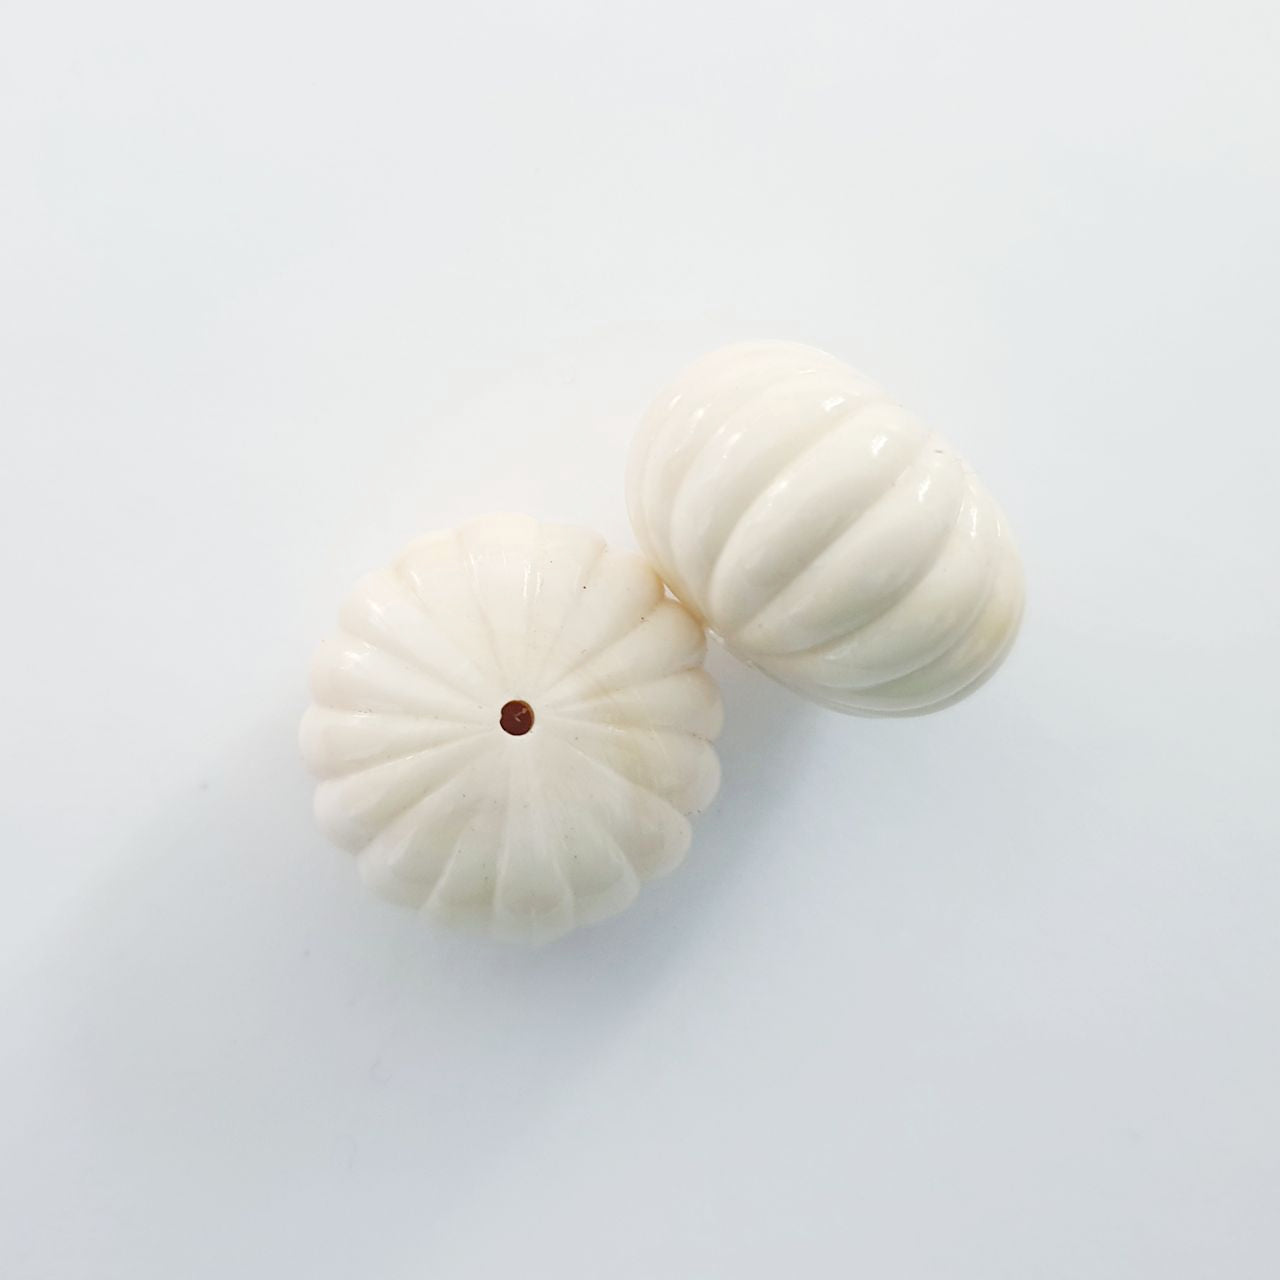 Lucite Bead Ivory Grooved Scalloped Melon 25x17mm Large